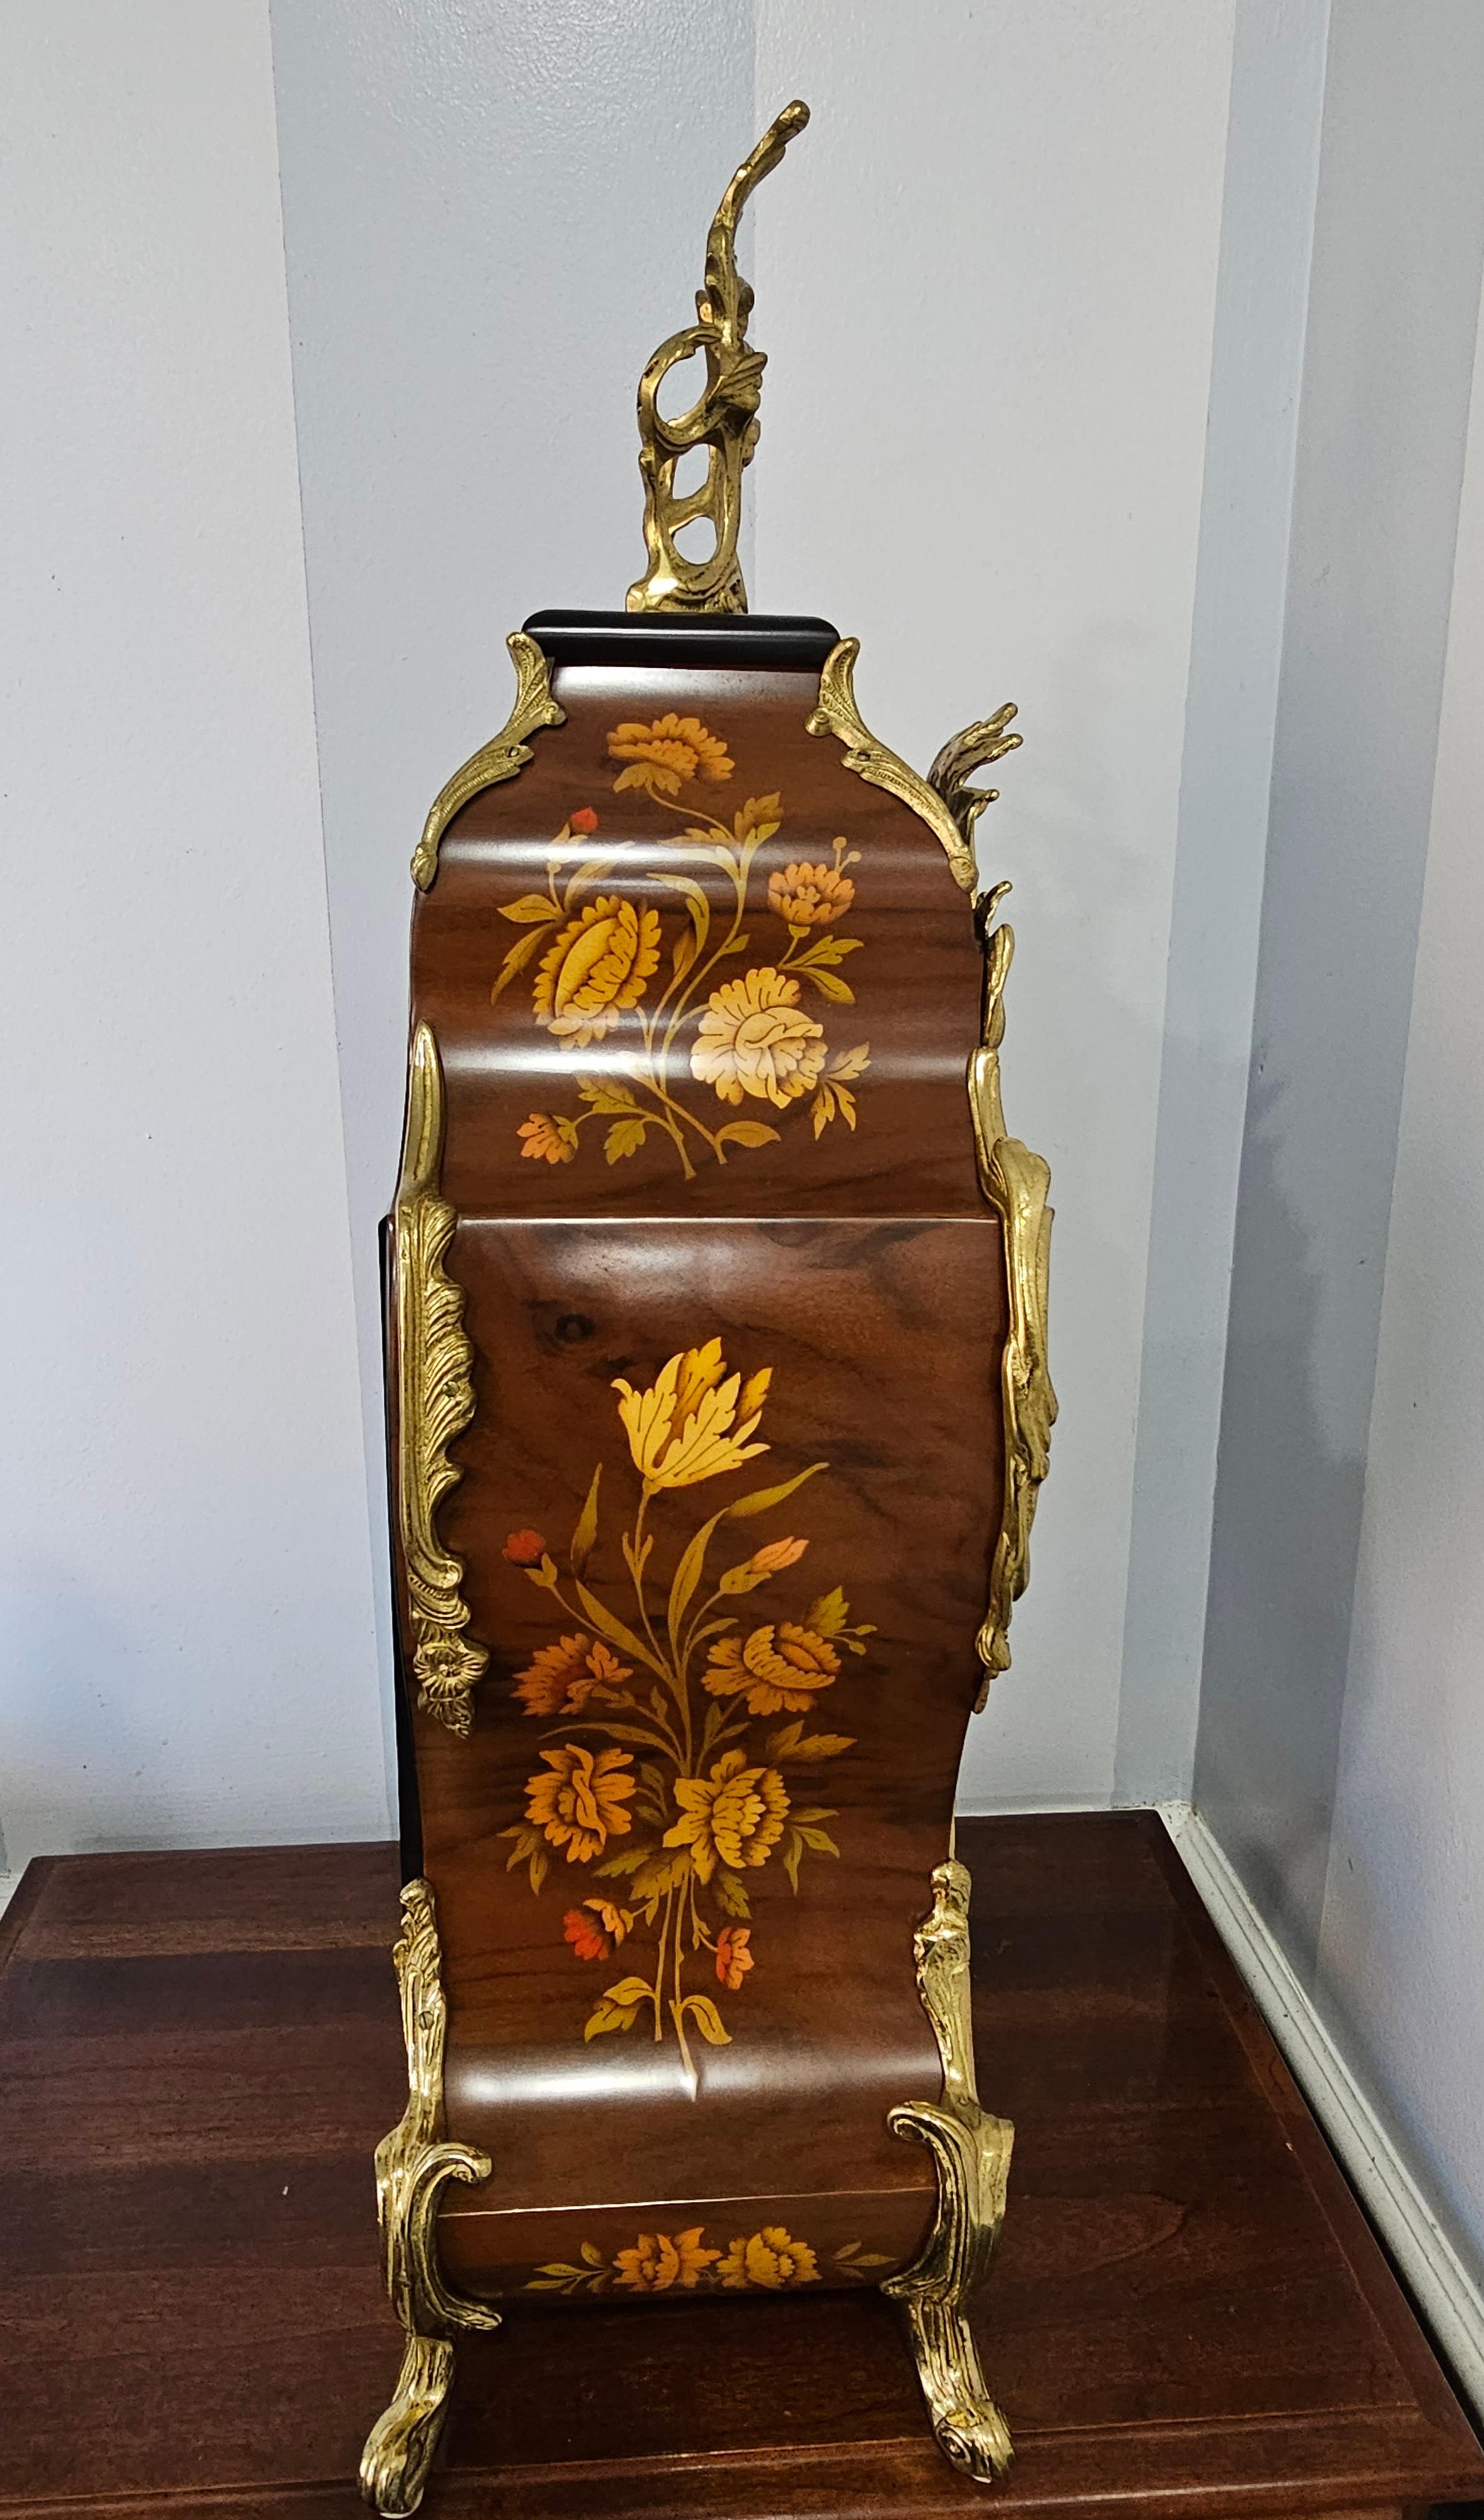 Post-Modern New Franz Hermle Mantel Clock in DeArt Italian Fine Marquetry and Ormolu Case, N For Sale